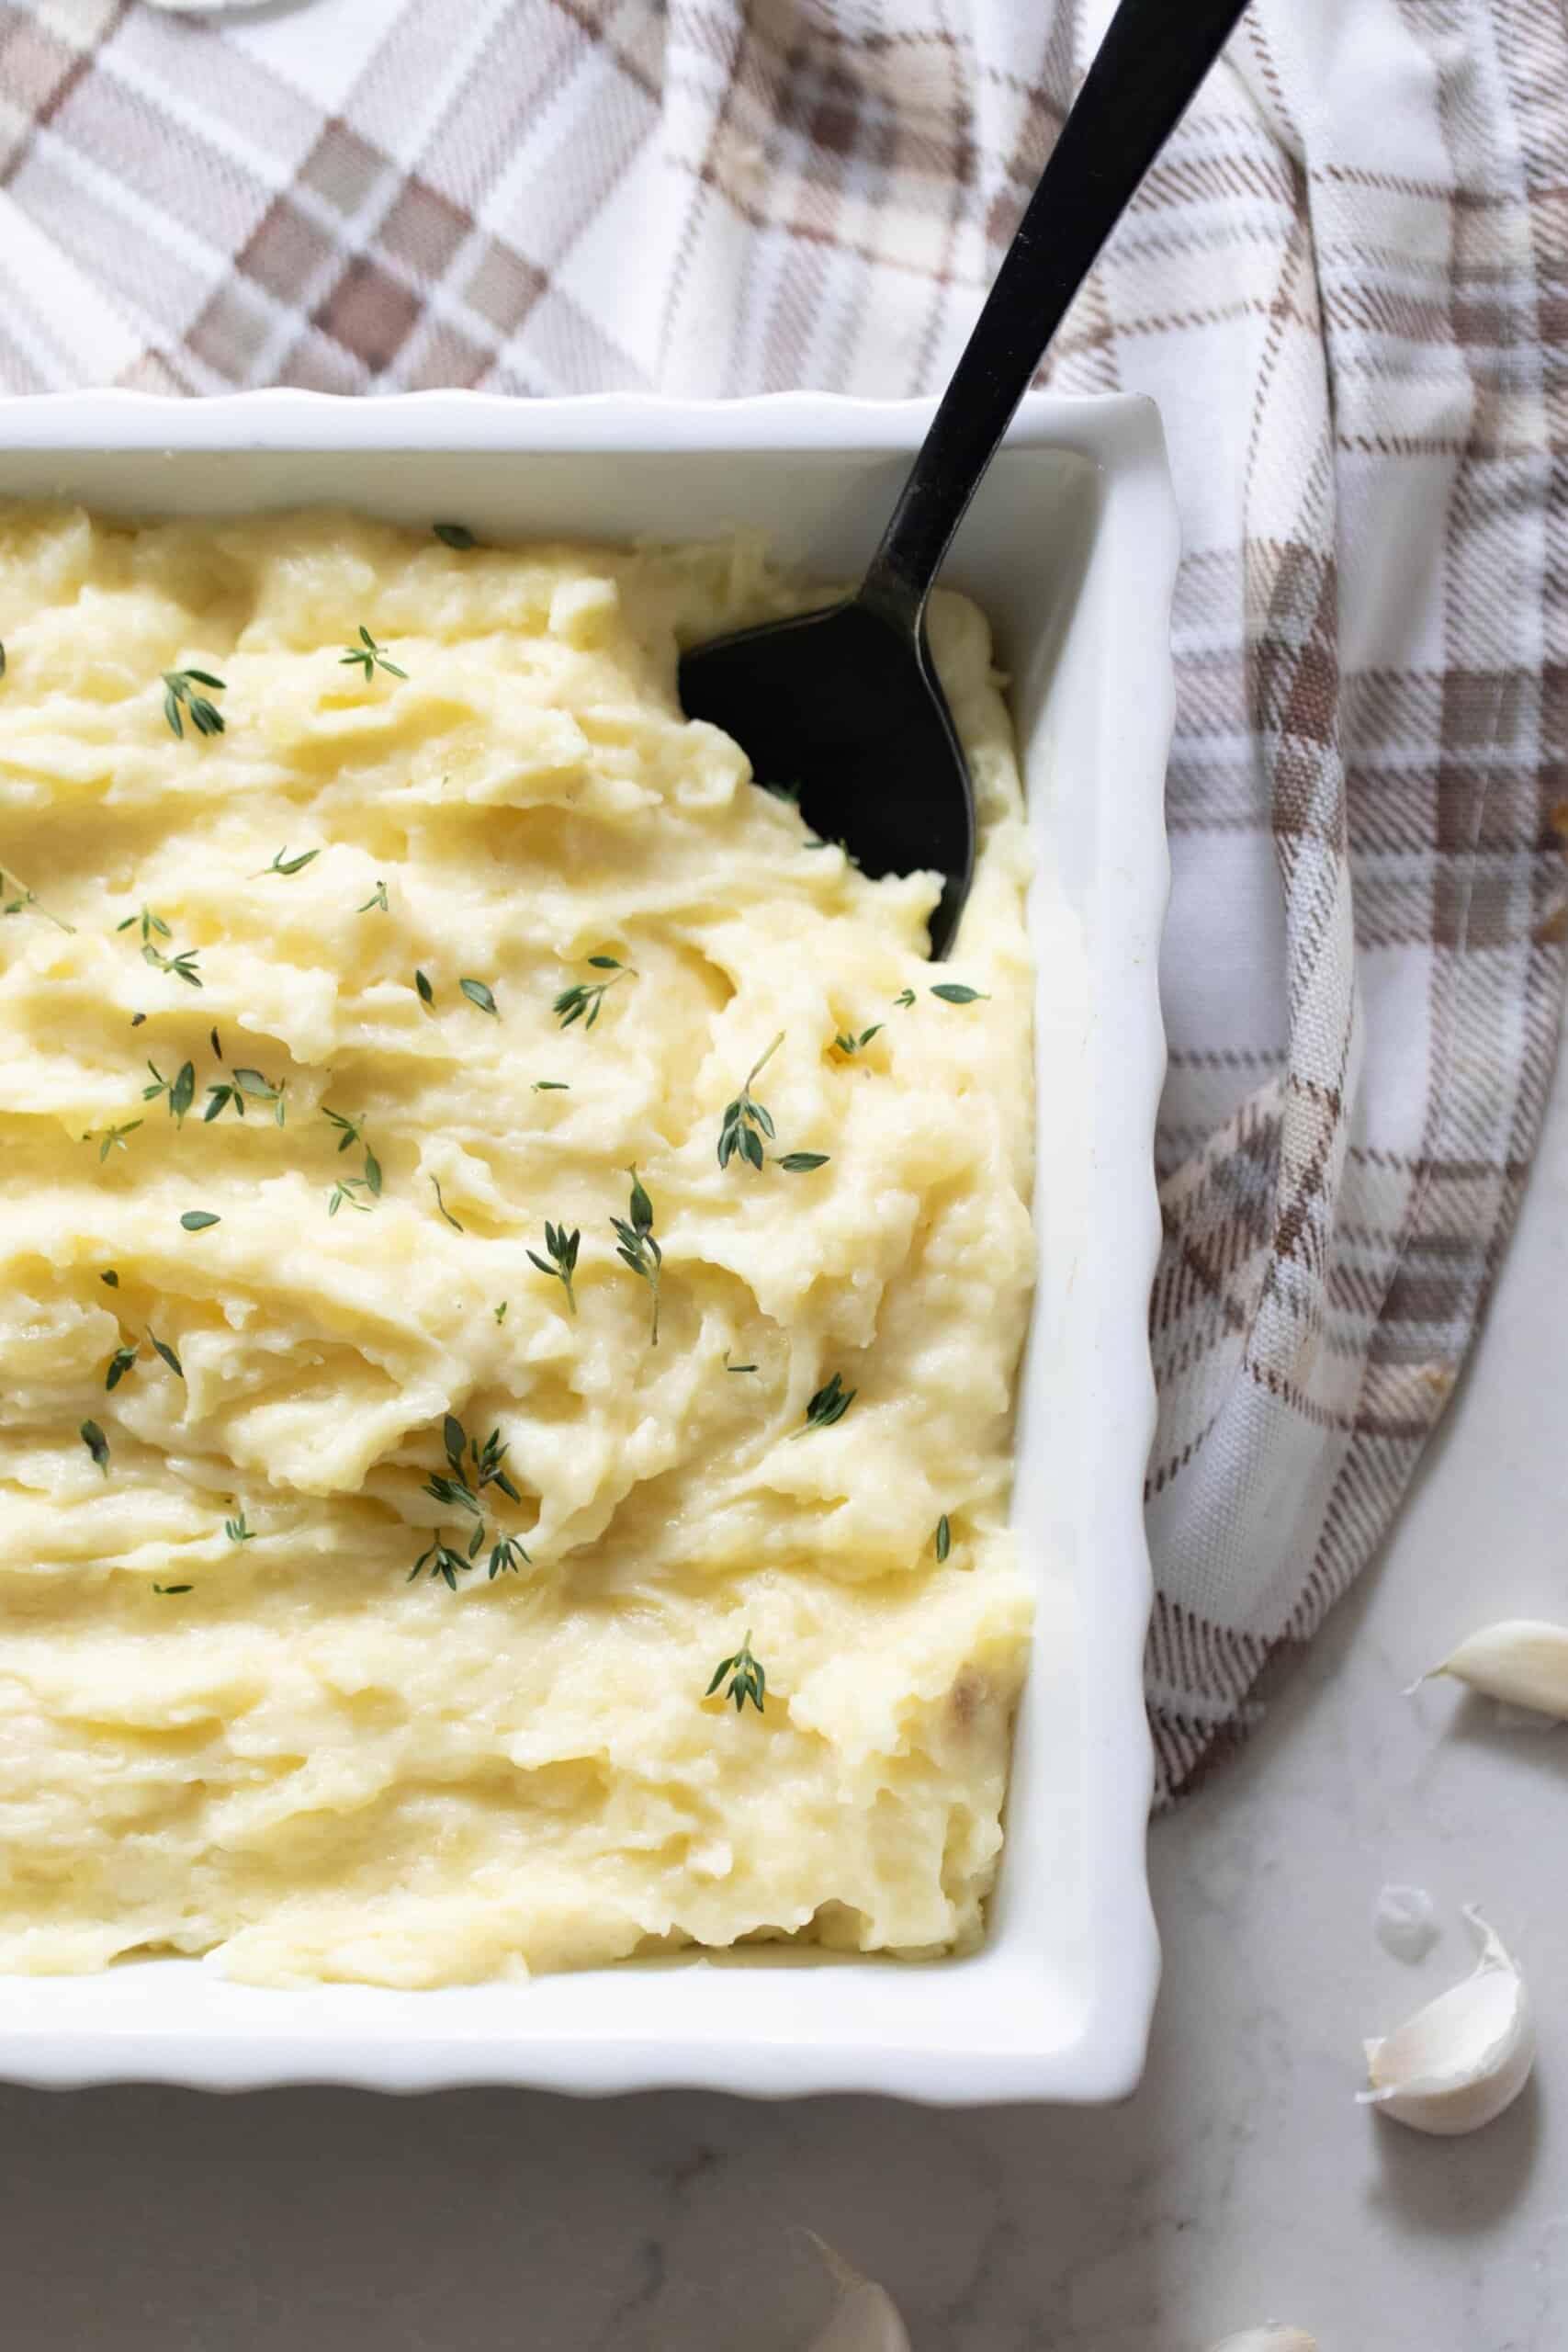 garlic mashed potatoes topped with herbs in a white baking dish with a black spoon in the potatoes. The baking dish rests on a tan and white plaid towel